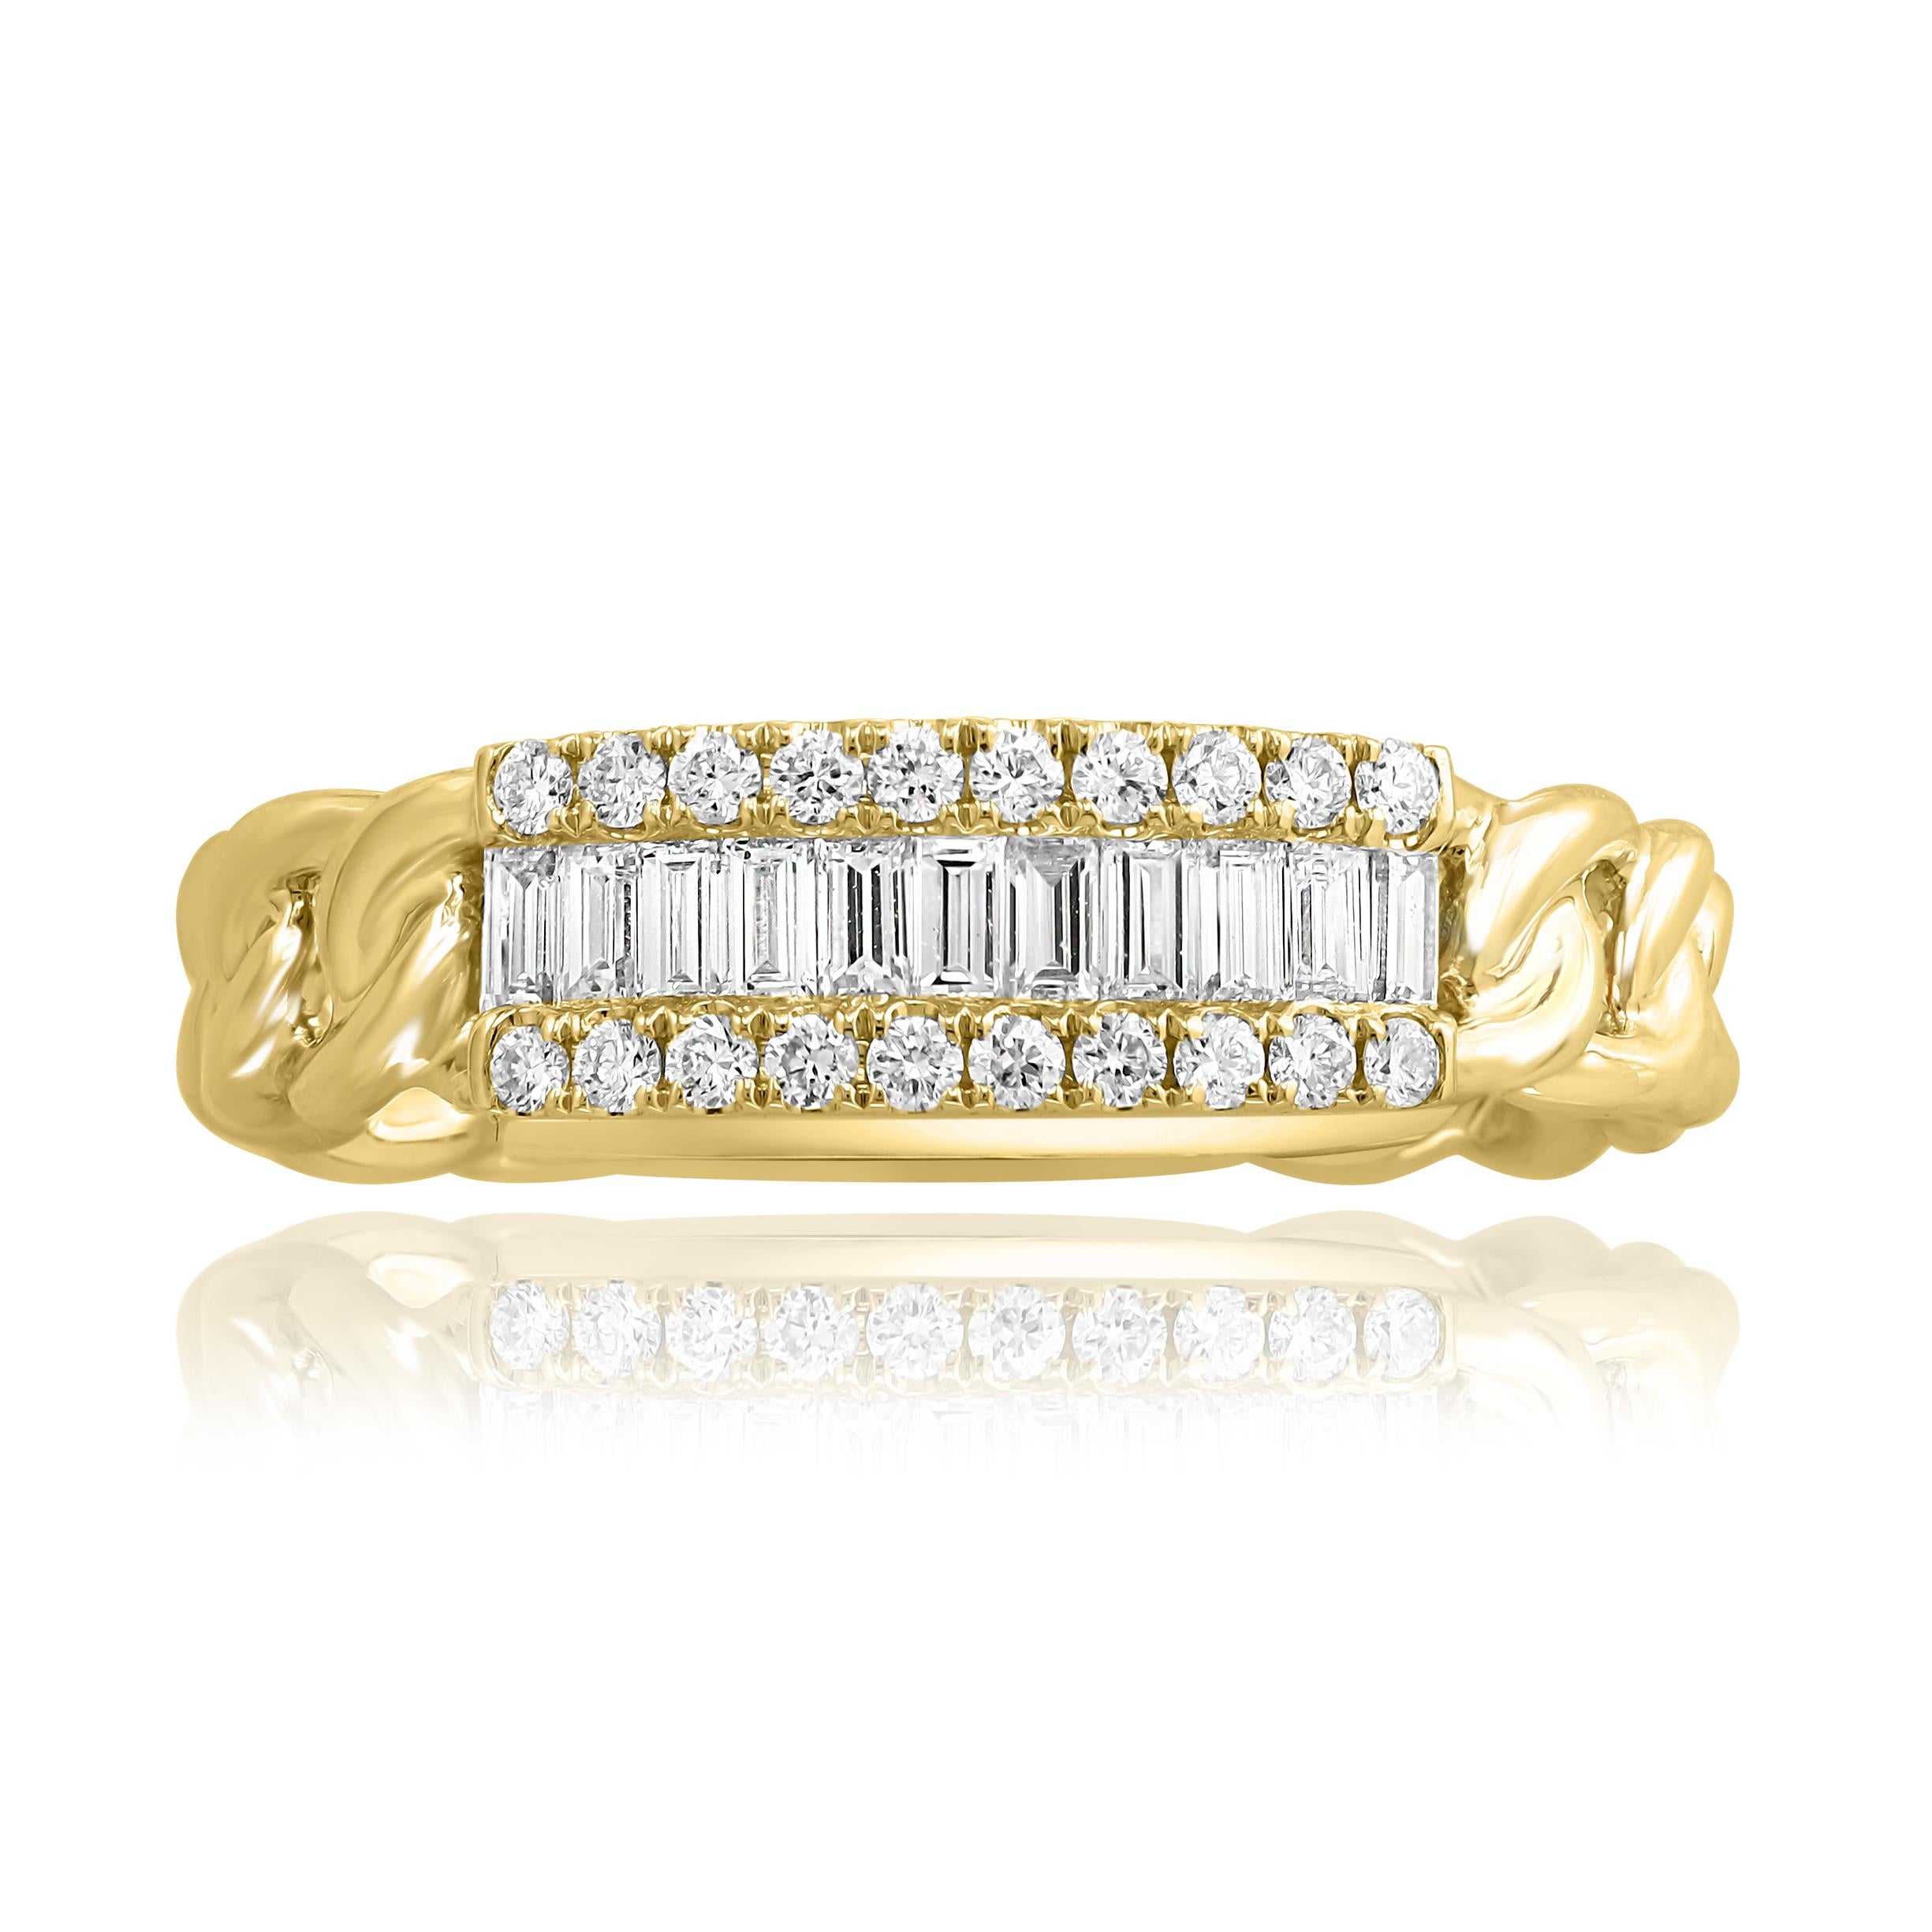 A fashionable piece of jewelry showcasing open work design. The middle style is encrusted with 11 baguette and 20 round brilliant diamonds weighing 0.25 carats and 0.16 carats total. Made in 18k yellow gold.

Size 6.5 US (Sizable). One of a Kind 